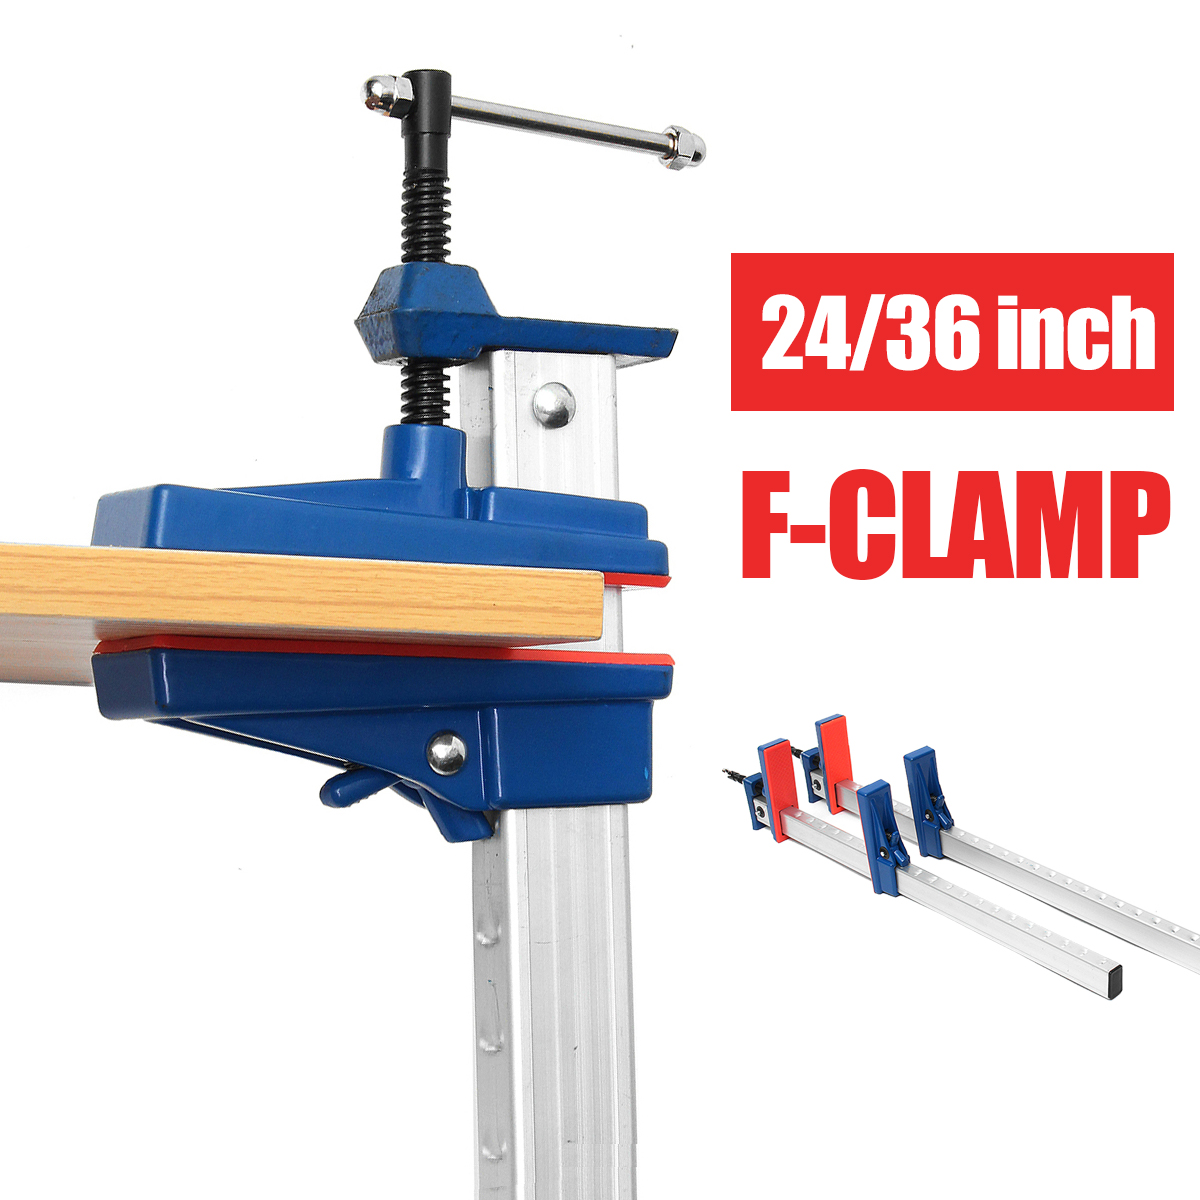 24/36 Inch Aluminum F-Clamp Bar Heavy Duty Holder Grip Release Parallel Adjustable Woodworking Tool 14